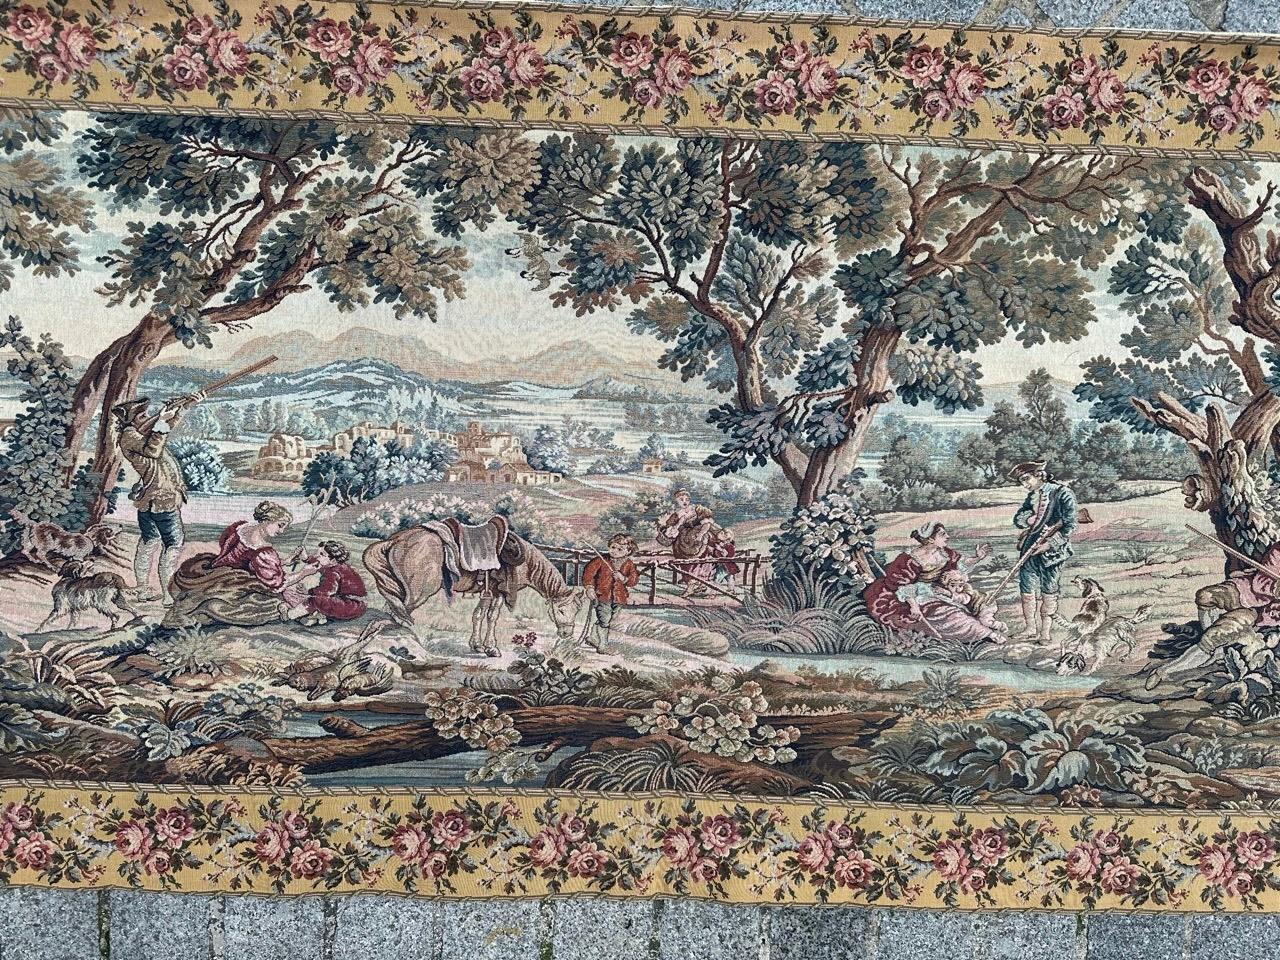 Pretty vintage French Aubusson style tapestry woven on mechanical jacquard looms with wool and cotton with a design of « Hunters' stop »

Based on an Aubusson tapestry, mid-18th century. The Aubusson weavers who traditionally created “greenery” or